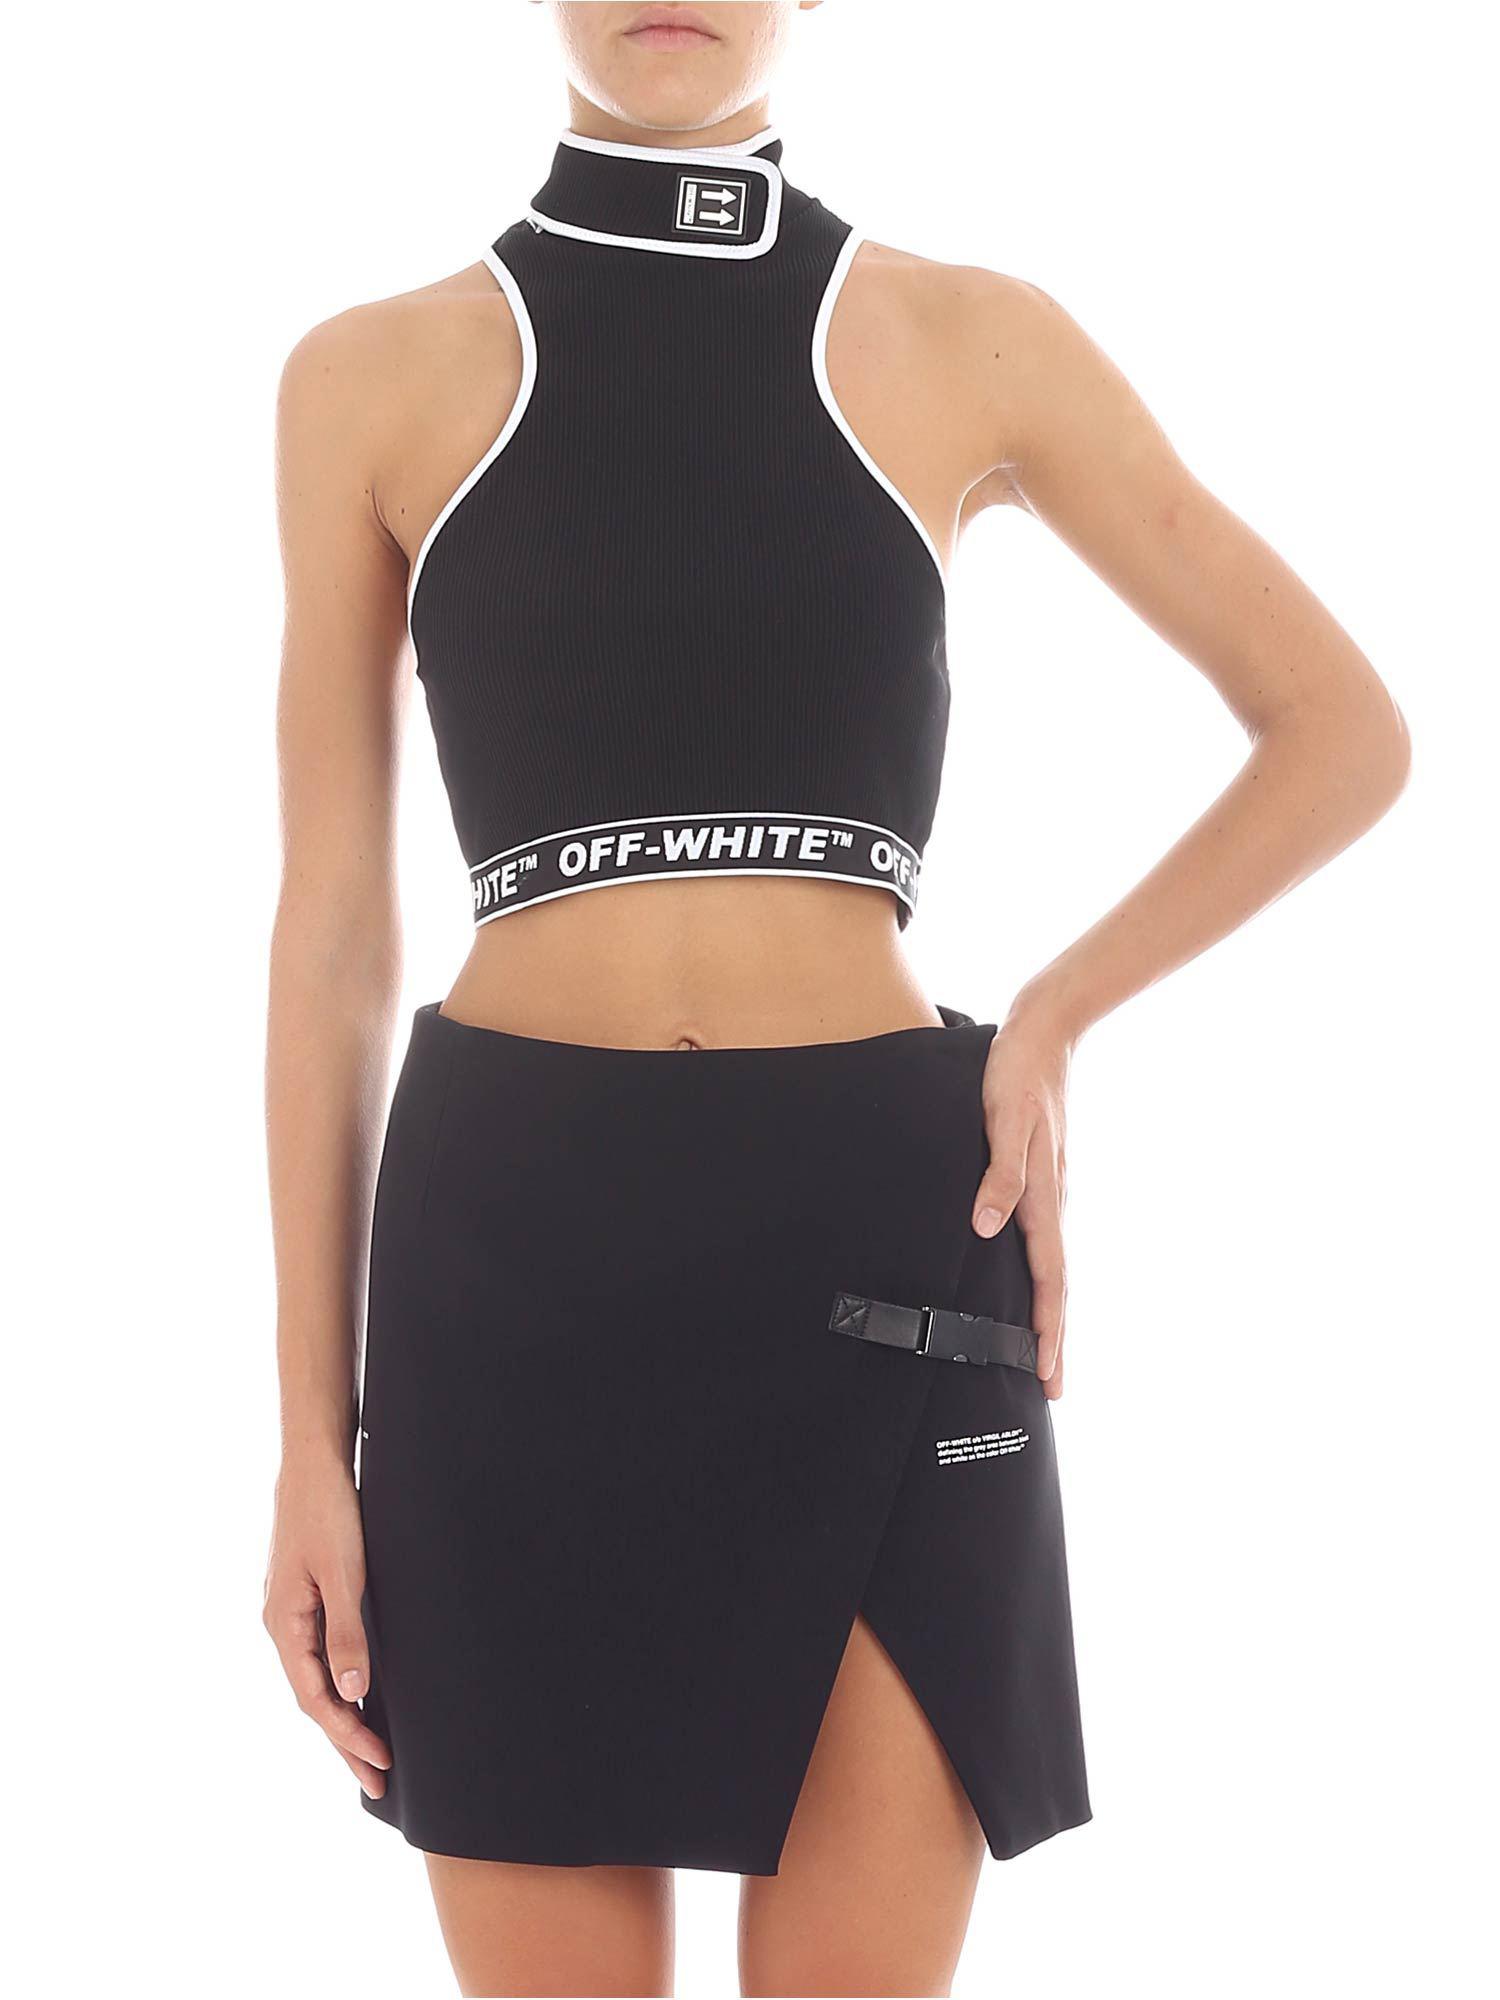 Off-White c/o Virgil Abloh Synthetic Cannette Crop Turtleneck Top in Black  - Lyst